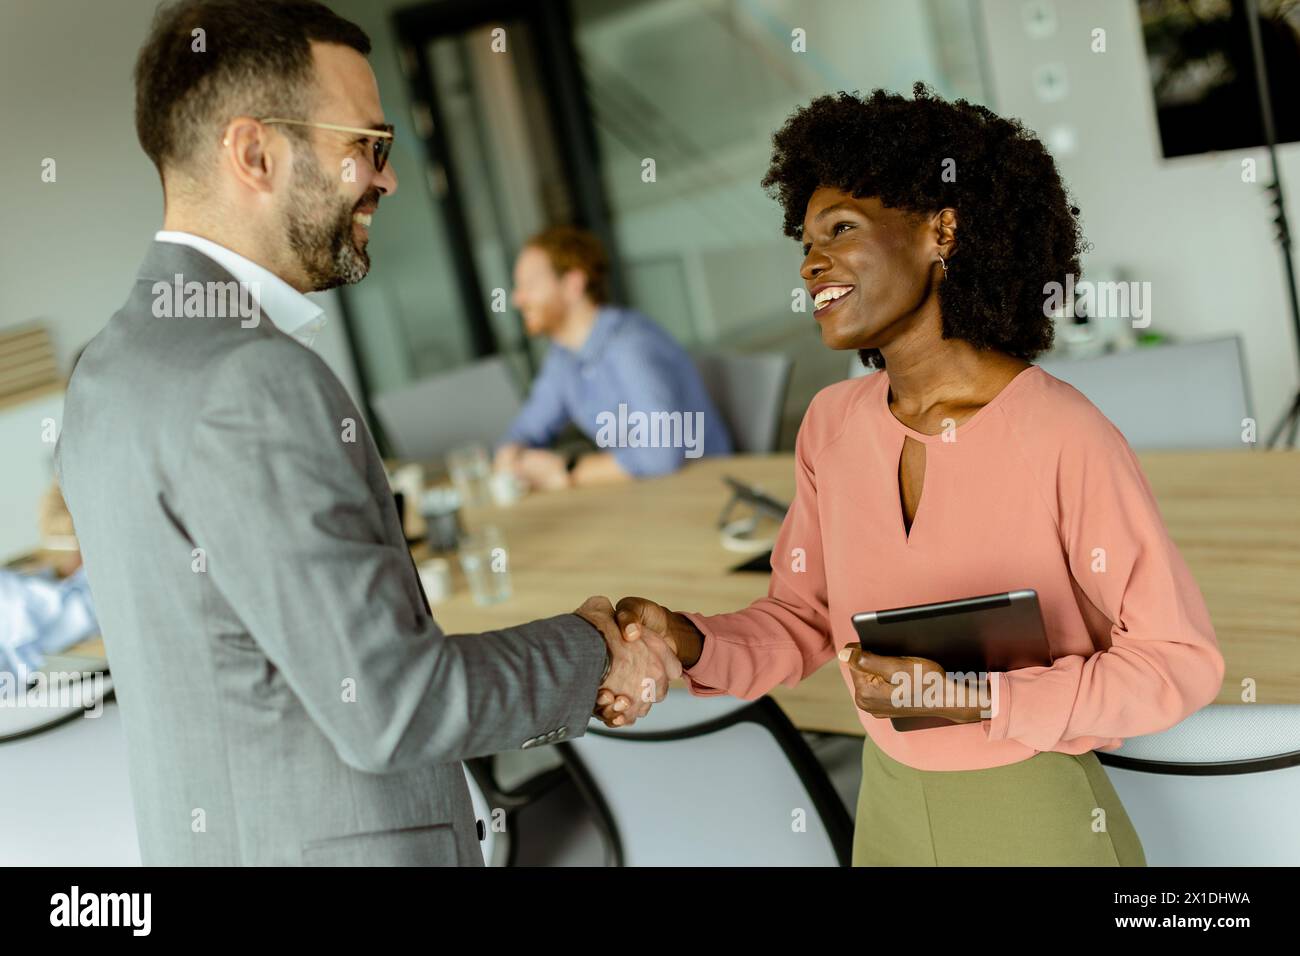 Two professionals warmly shaking hands, smiling in agreement, as teamwork unfolds in the background Stock Photo